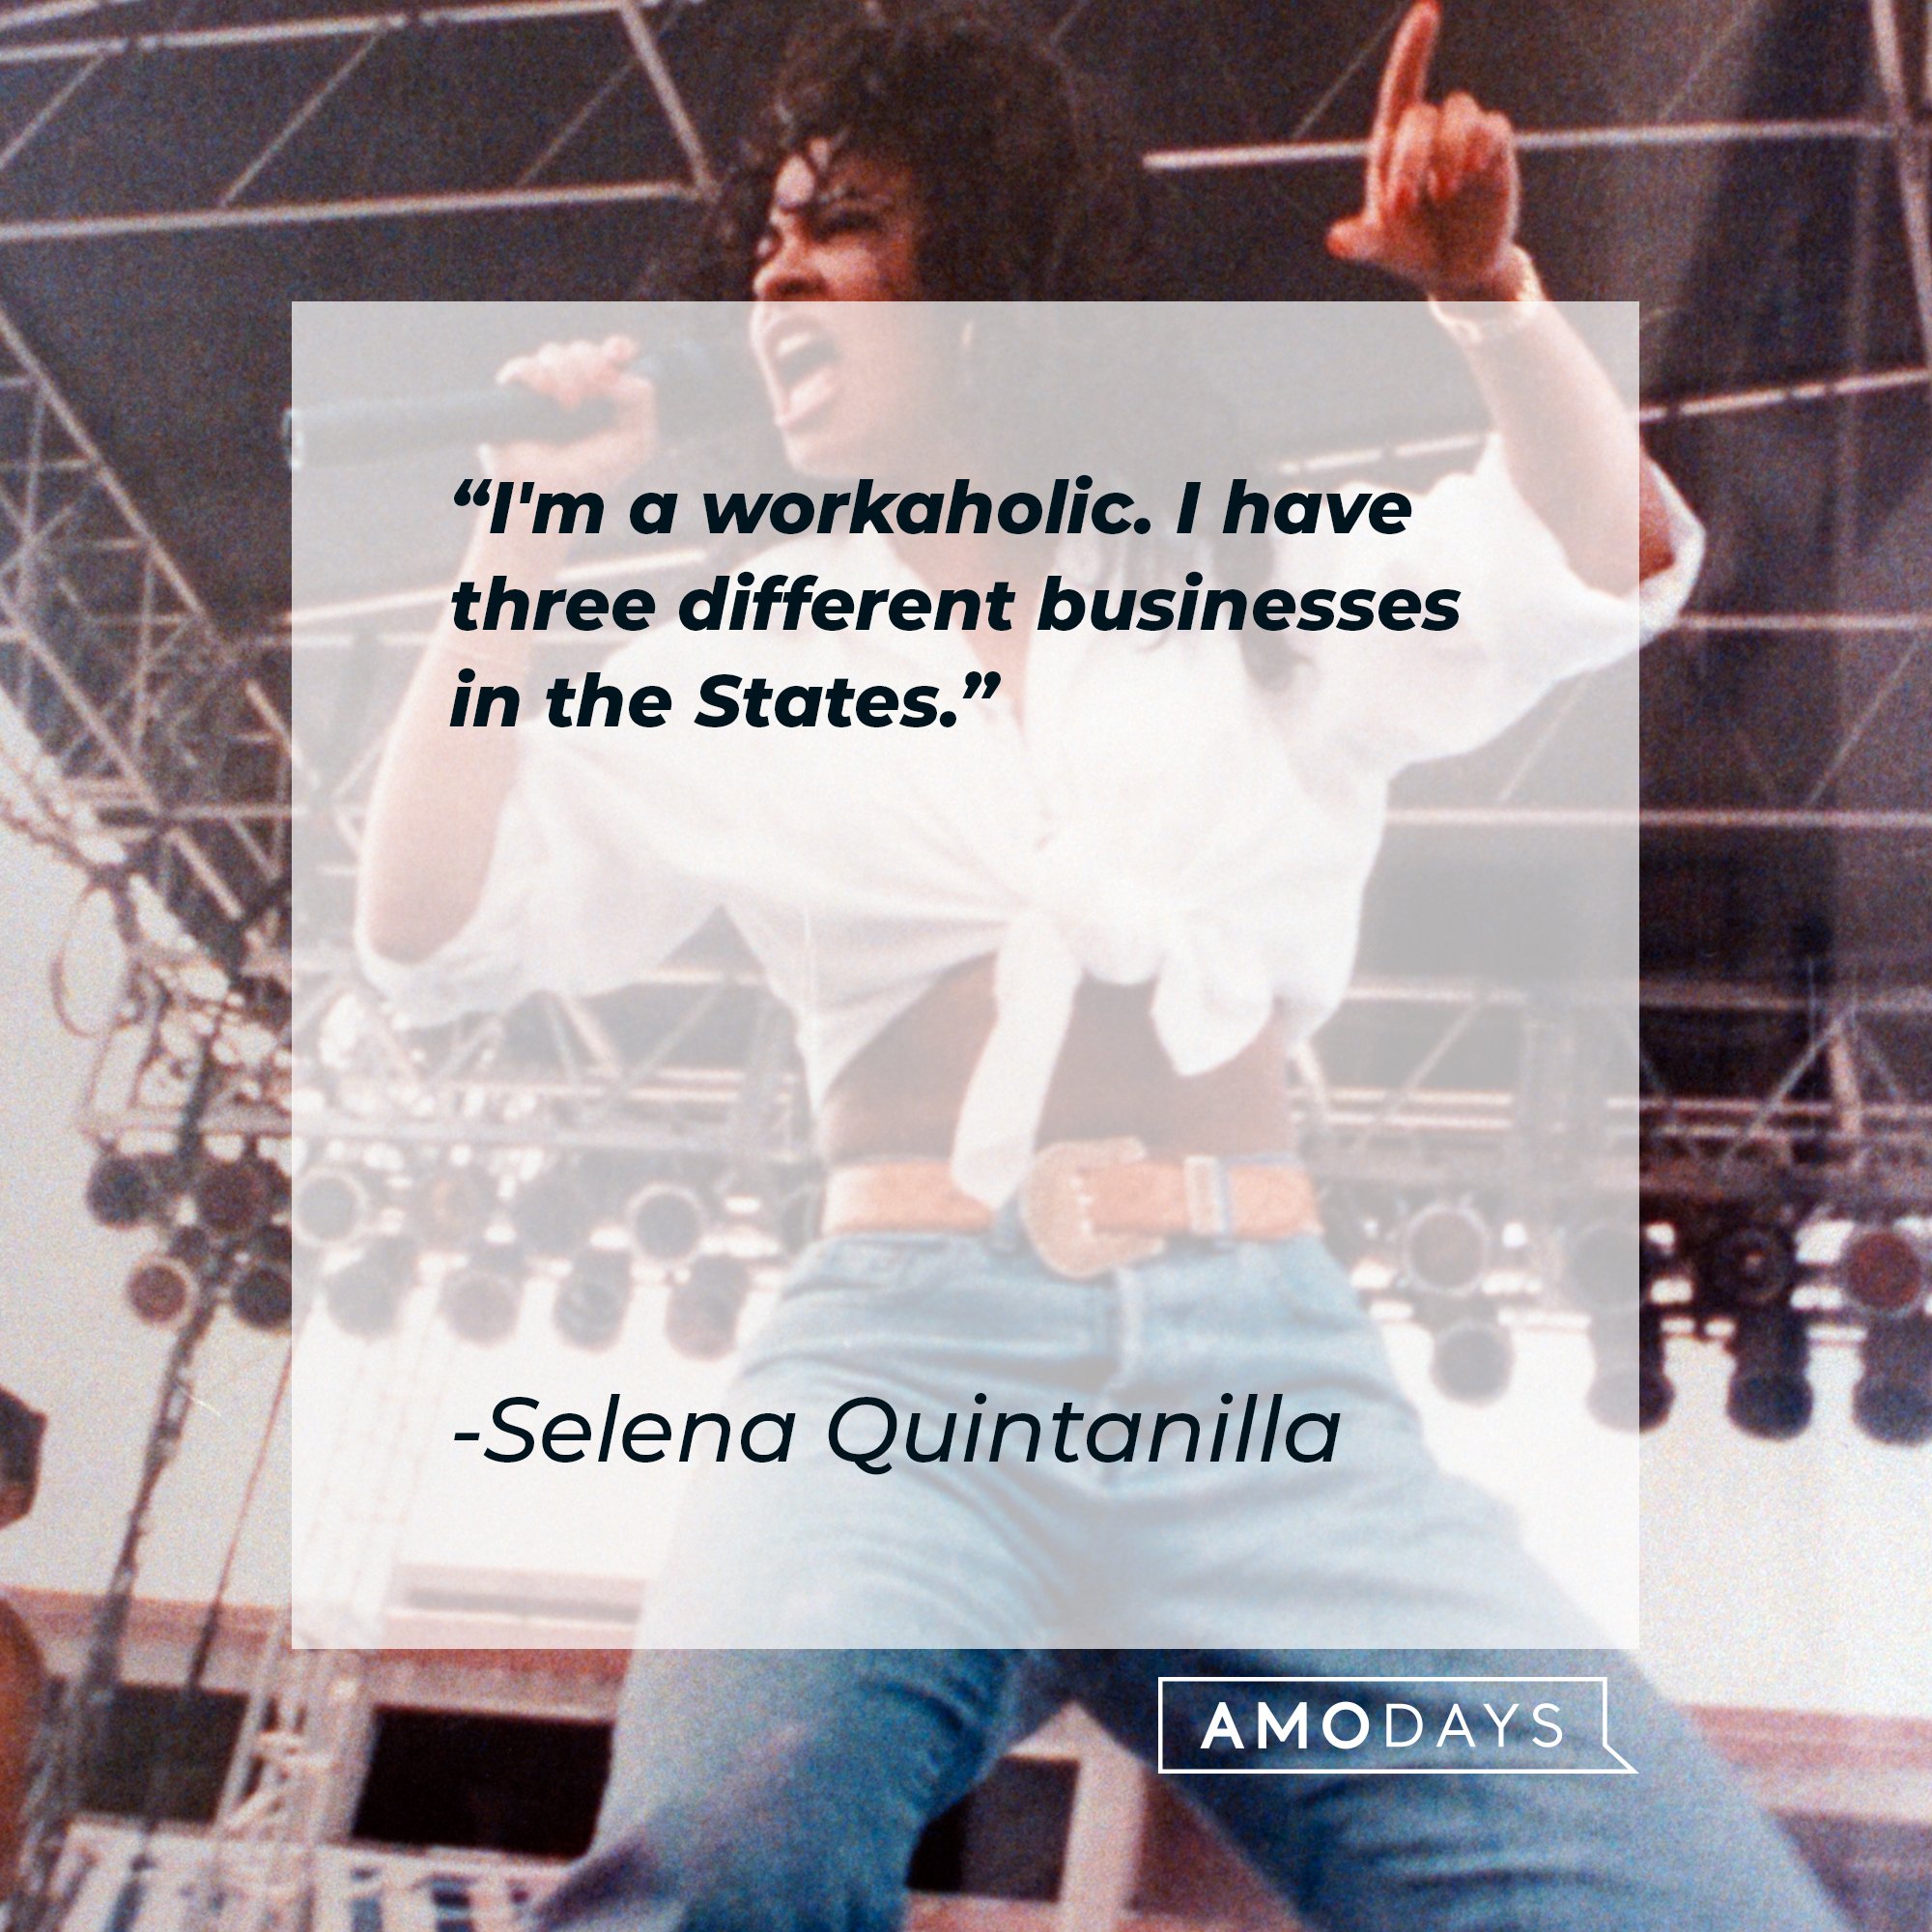 Selena Quintanilla's quote: "I'm a workaholic. I have three different businesses in the States." | Image: AmoDays